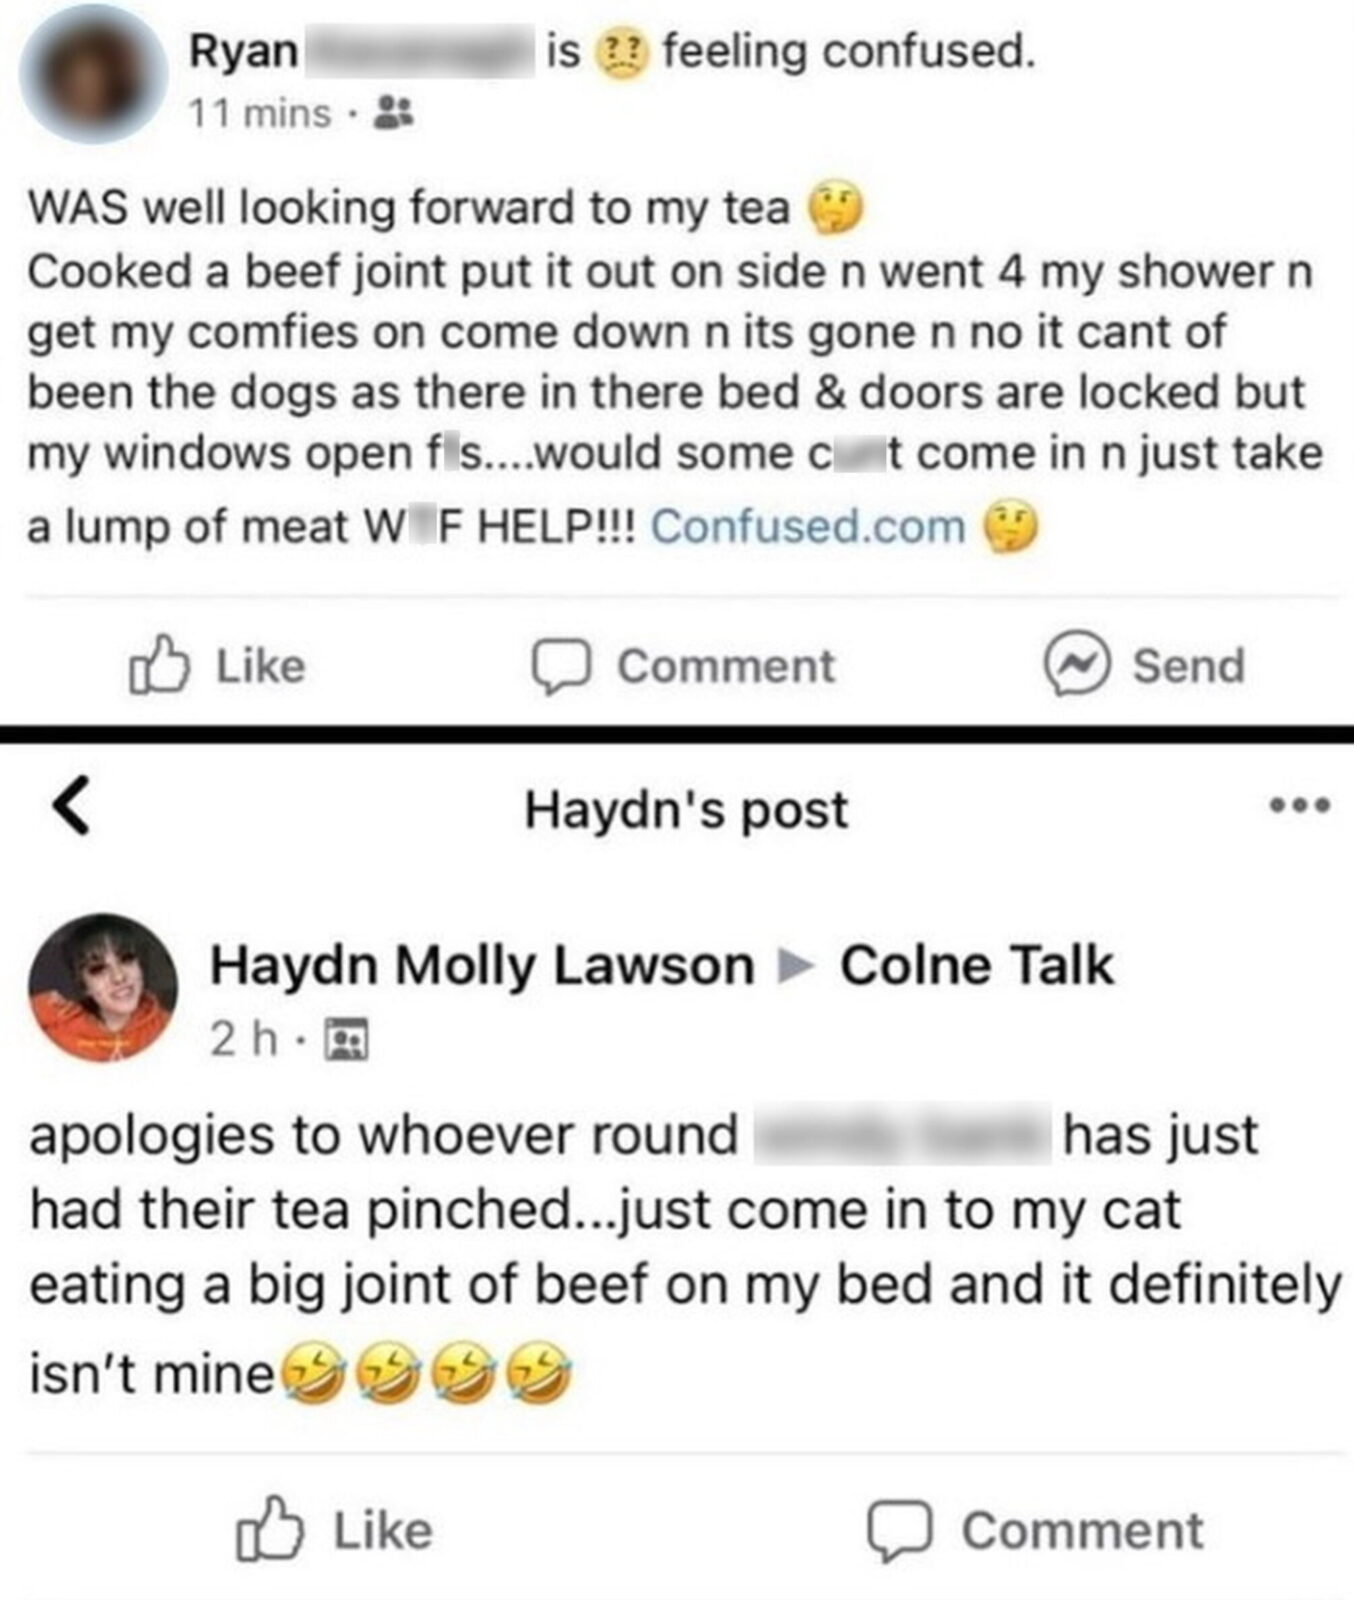 Man goes viral after his beef joint is stolen &#8211; then the culprit is identified, The Manc